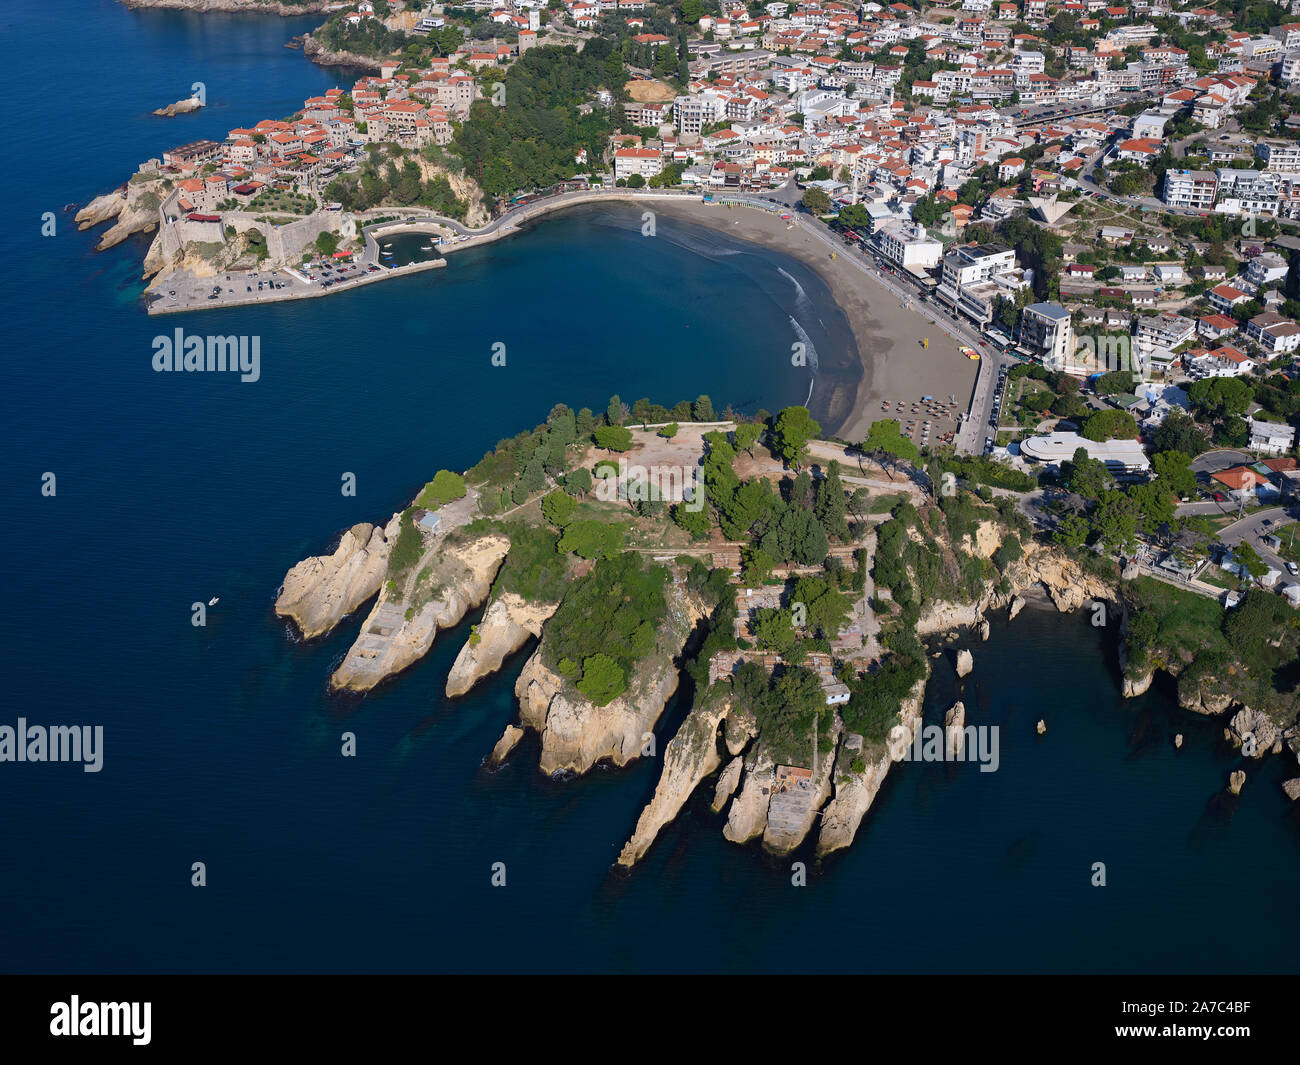 AERIAL VIEW. Historic town on a rocky promontory with a small sheltered bay. Ulcinj, Montenegro. Stock Photo